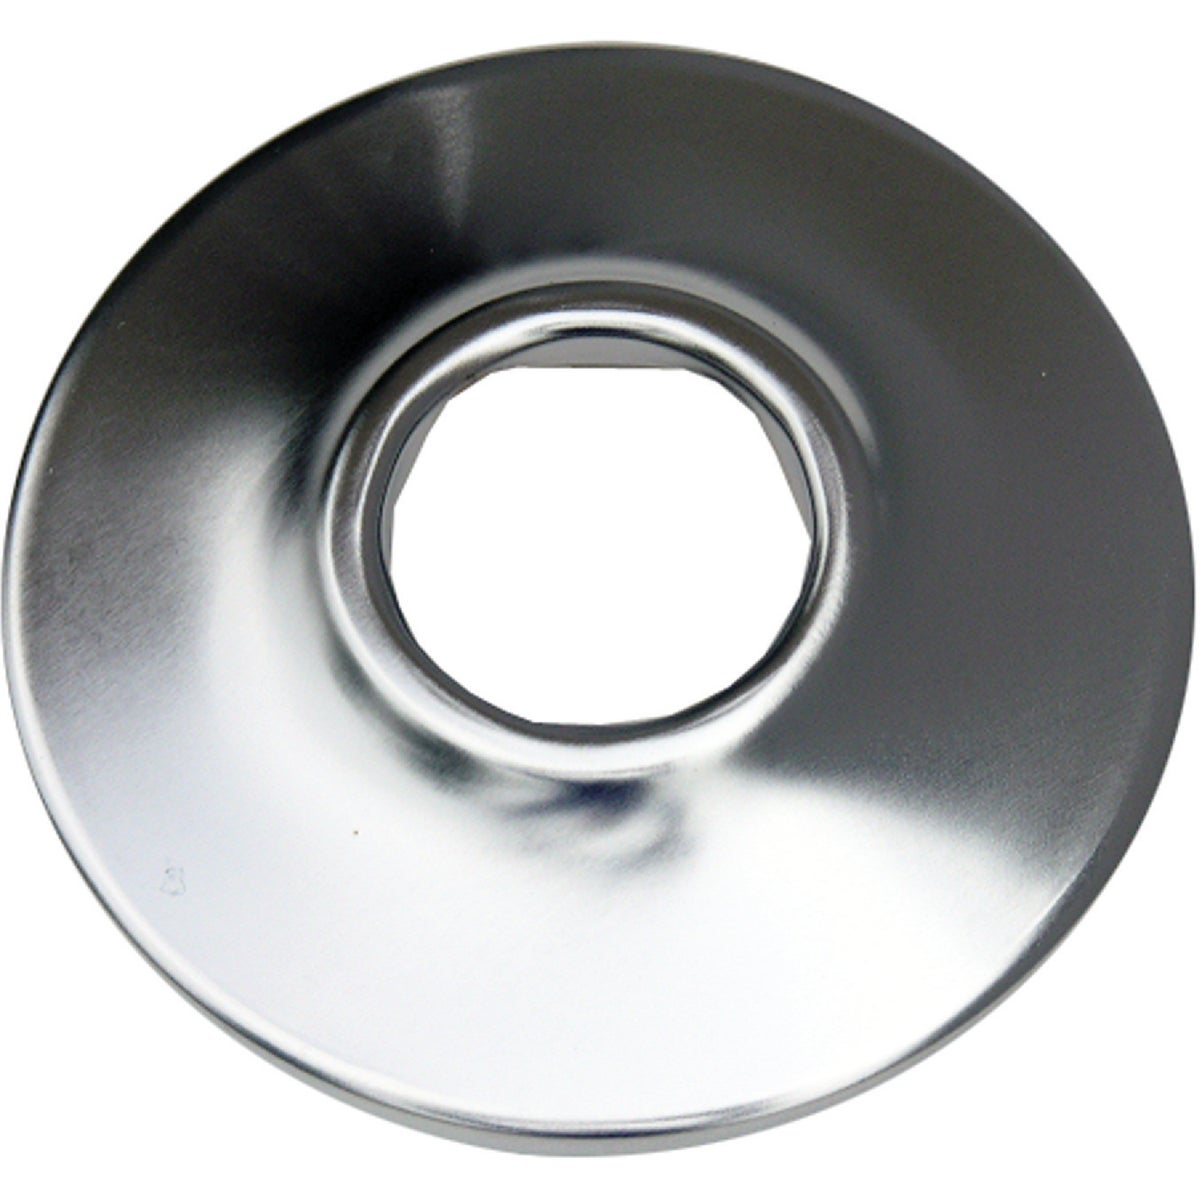 Lasco 3/8 In. IP or 1/2 In. Copper Chrome Plated Flange